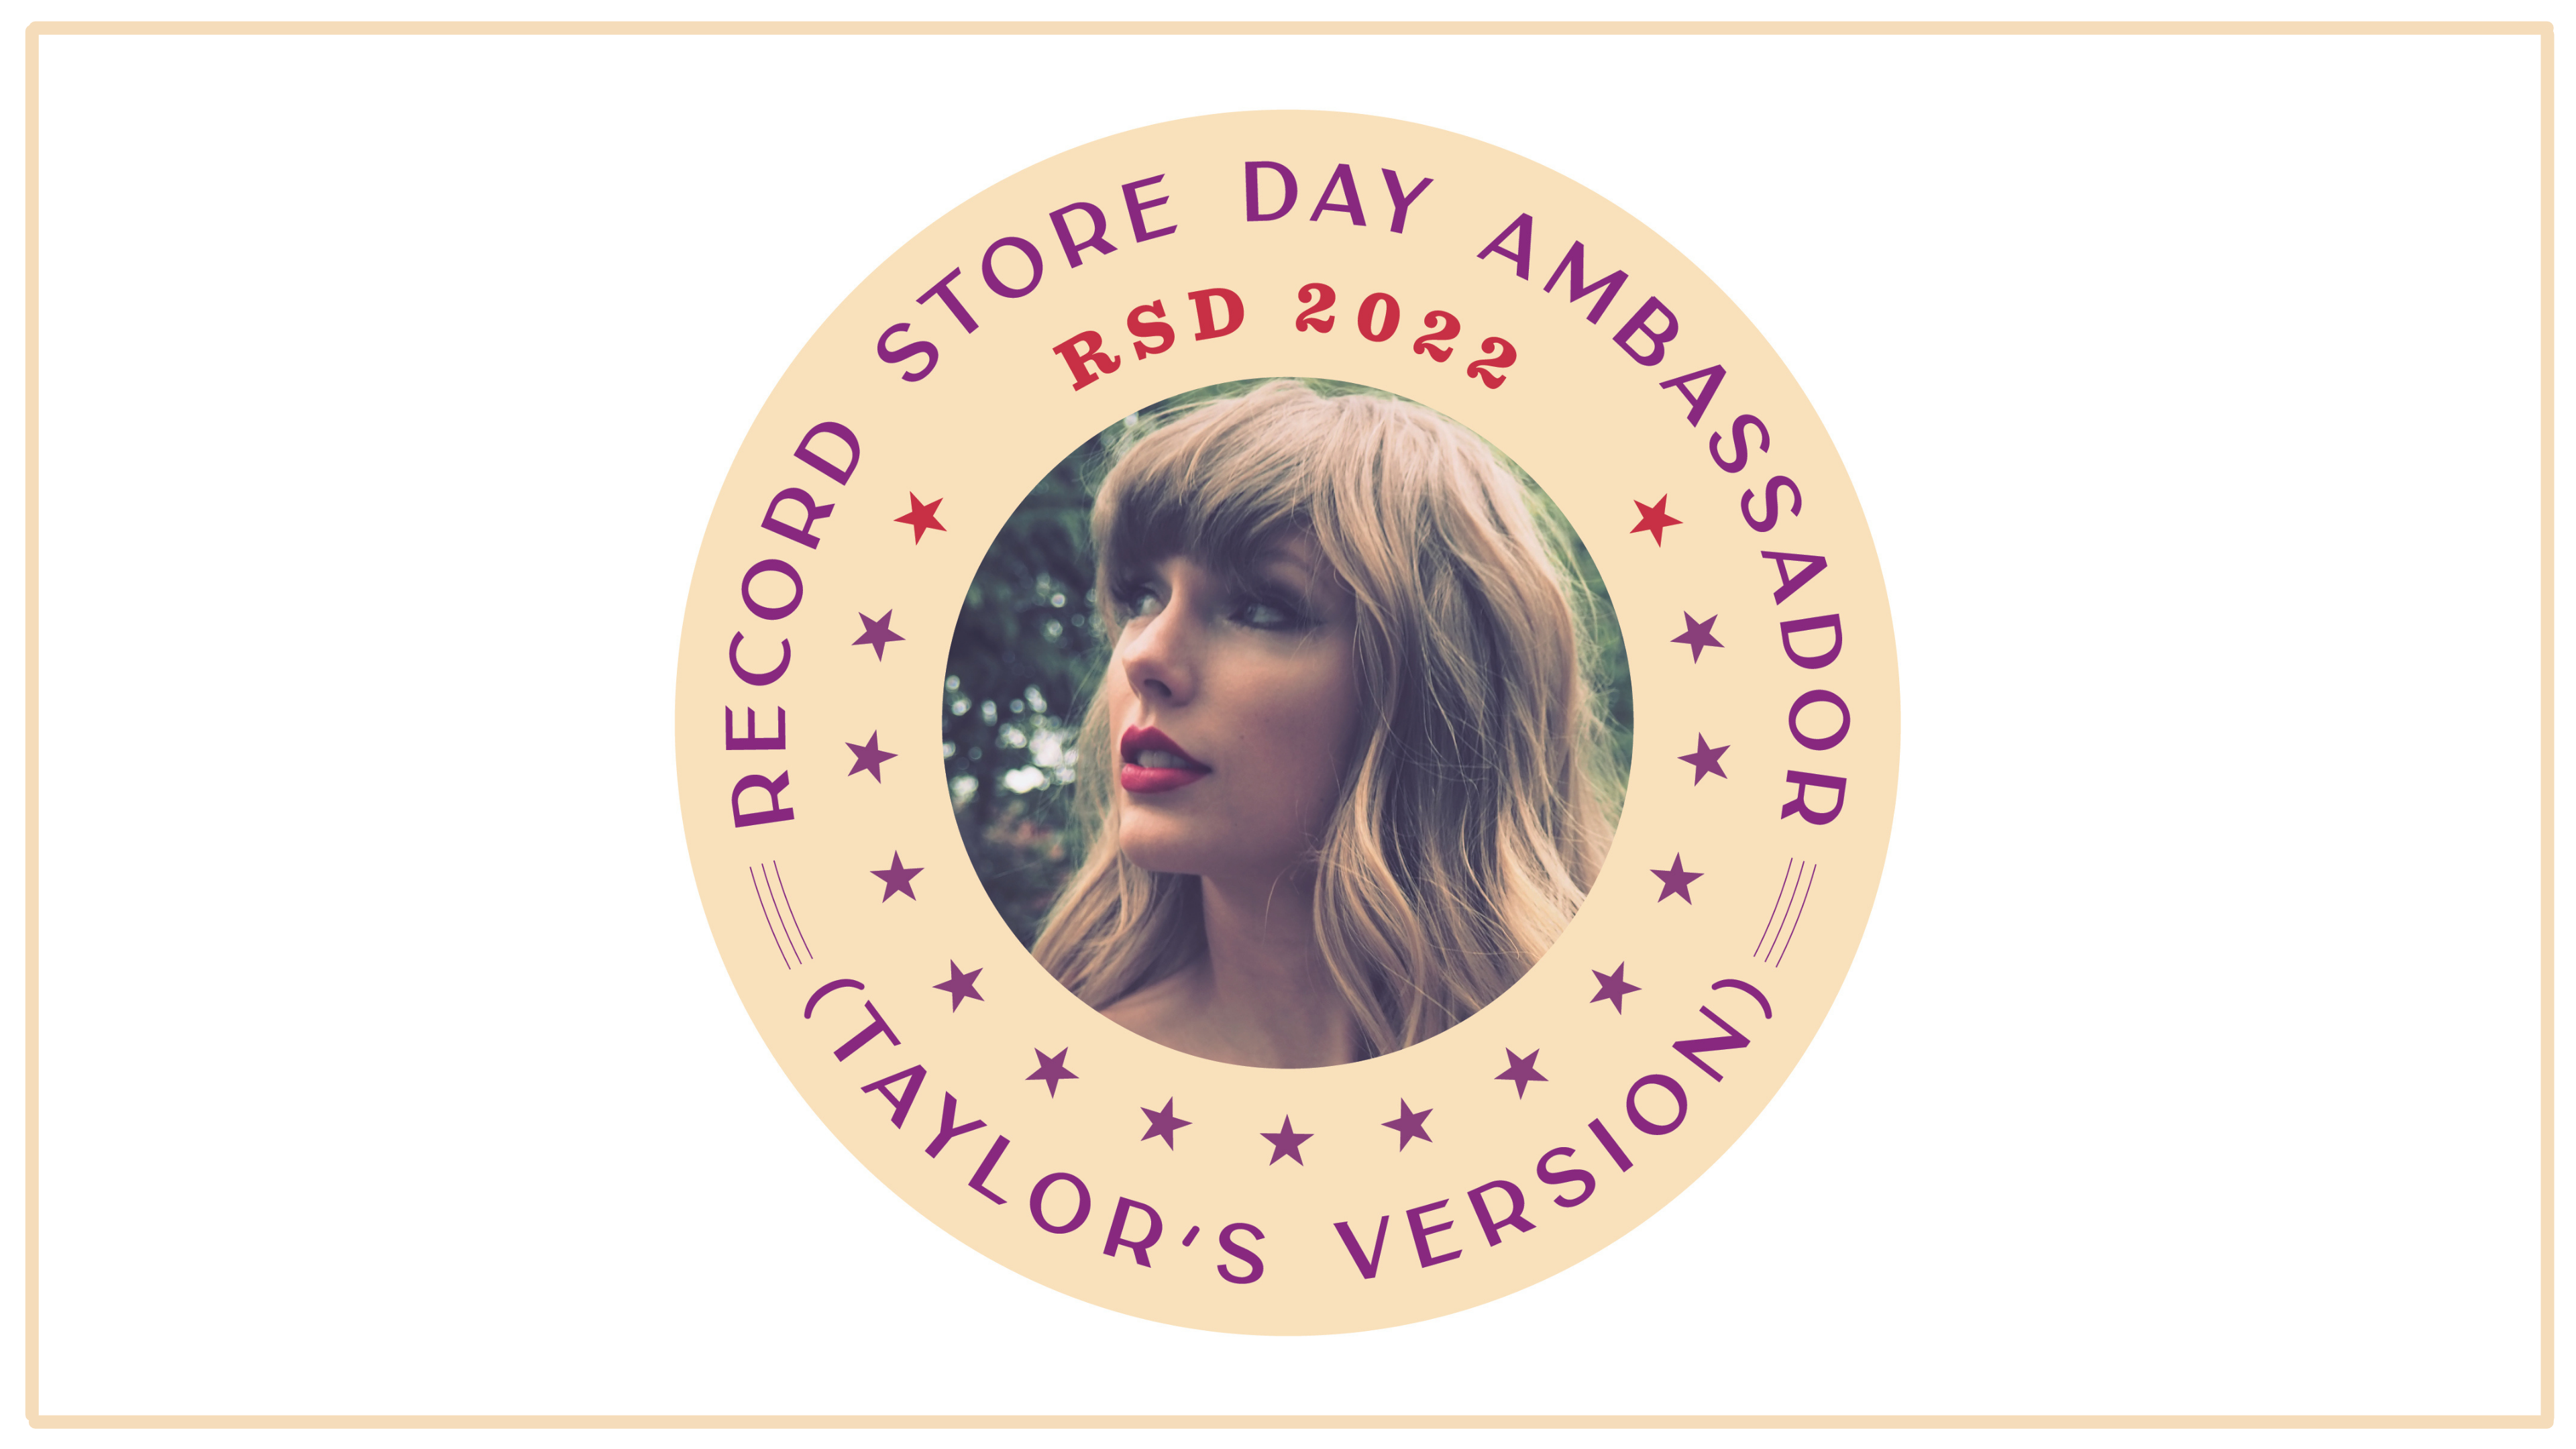 Taylor Swift wird globale Botschafterin des Record Store Day 2022